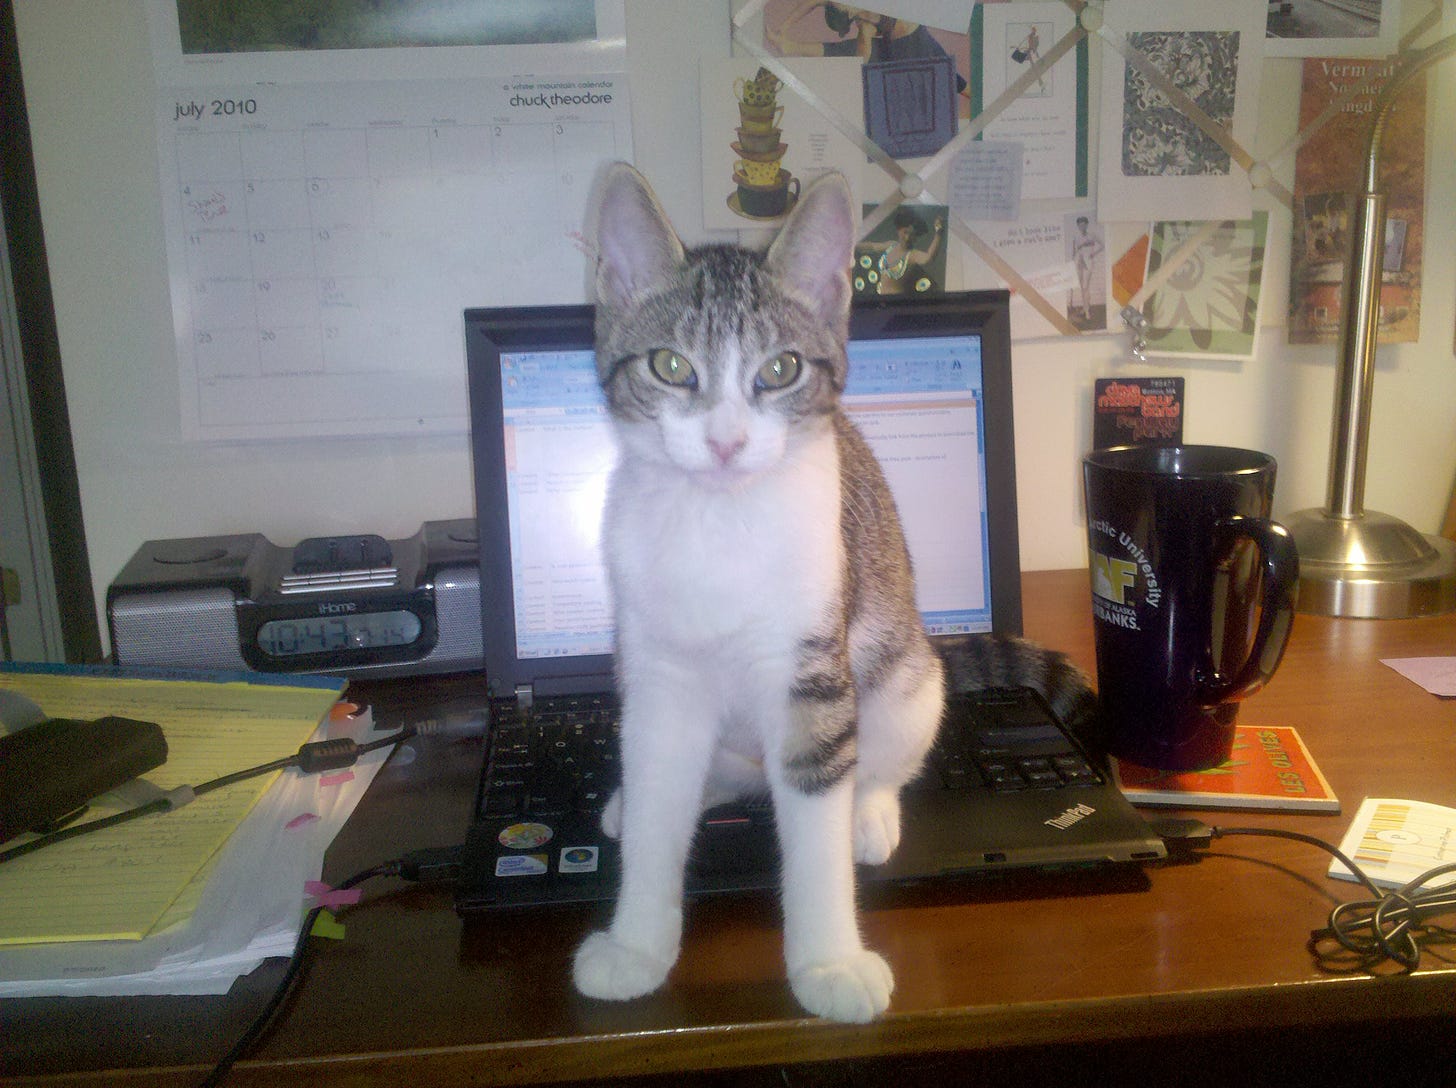 Small cat sitting on a laptop keyboard in front of a 2010 calendar